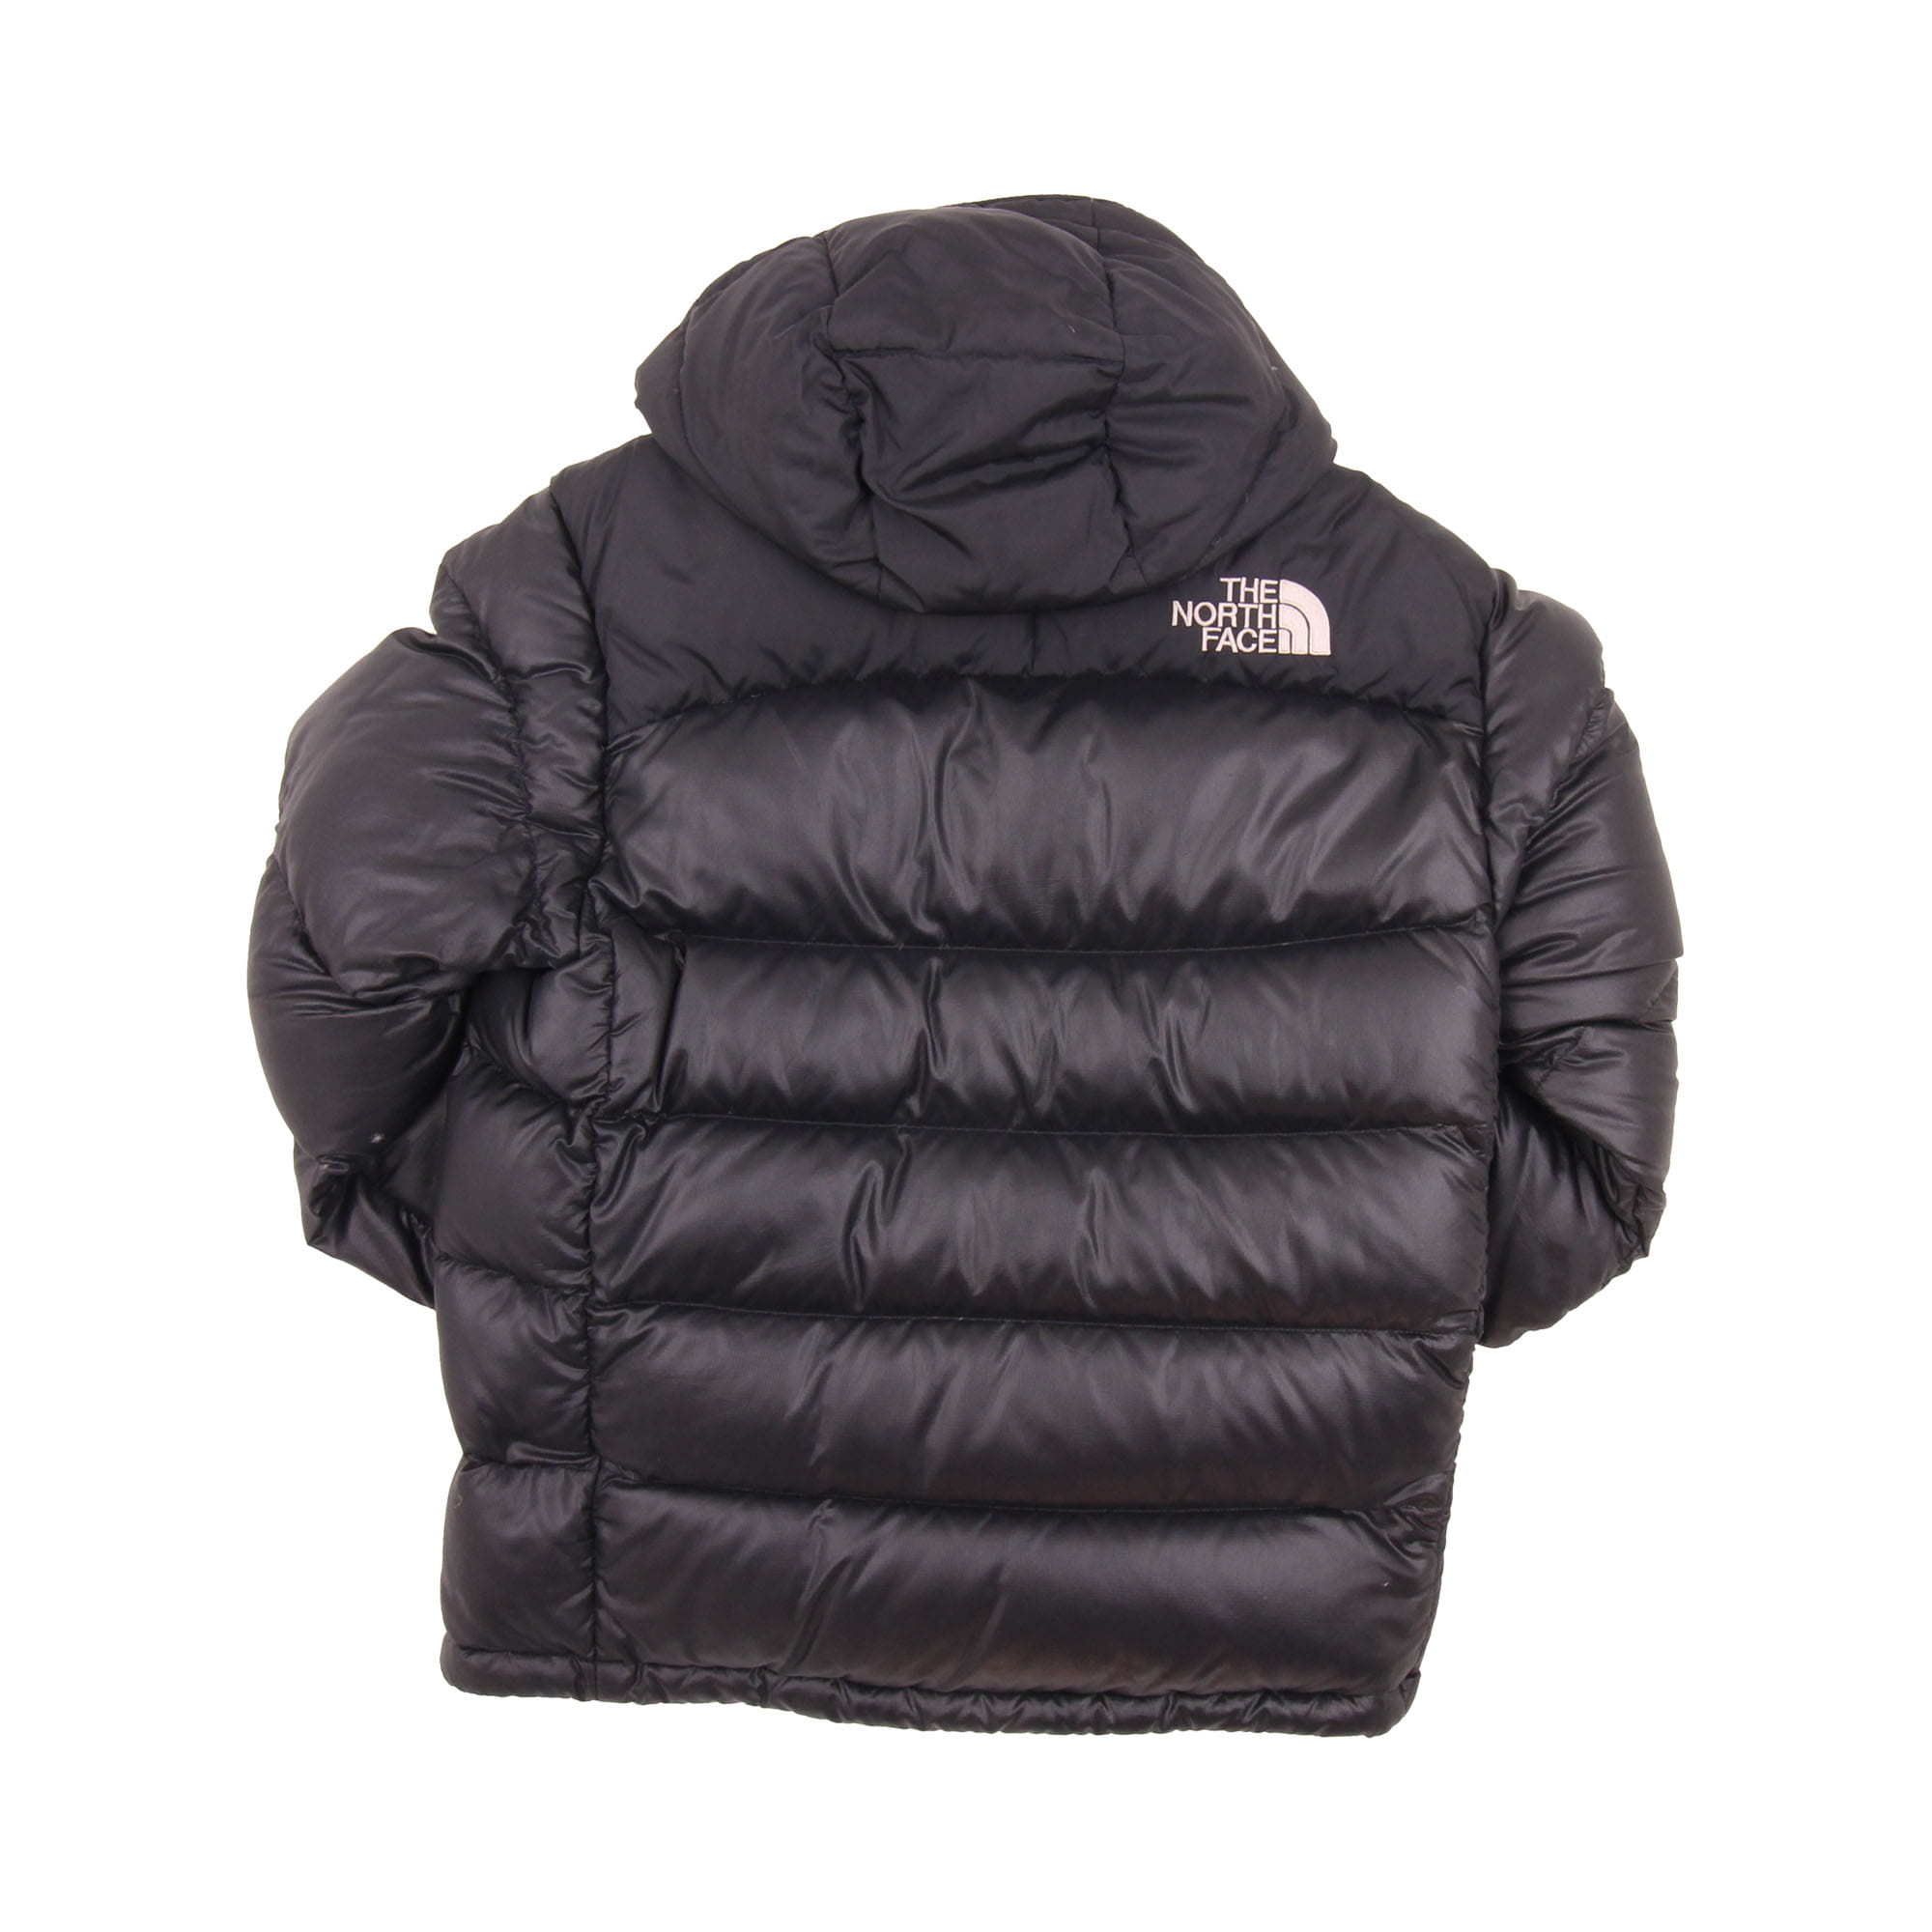 The North Face 700 Puffer Jacket Black -  S/M